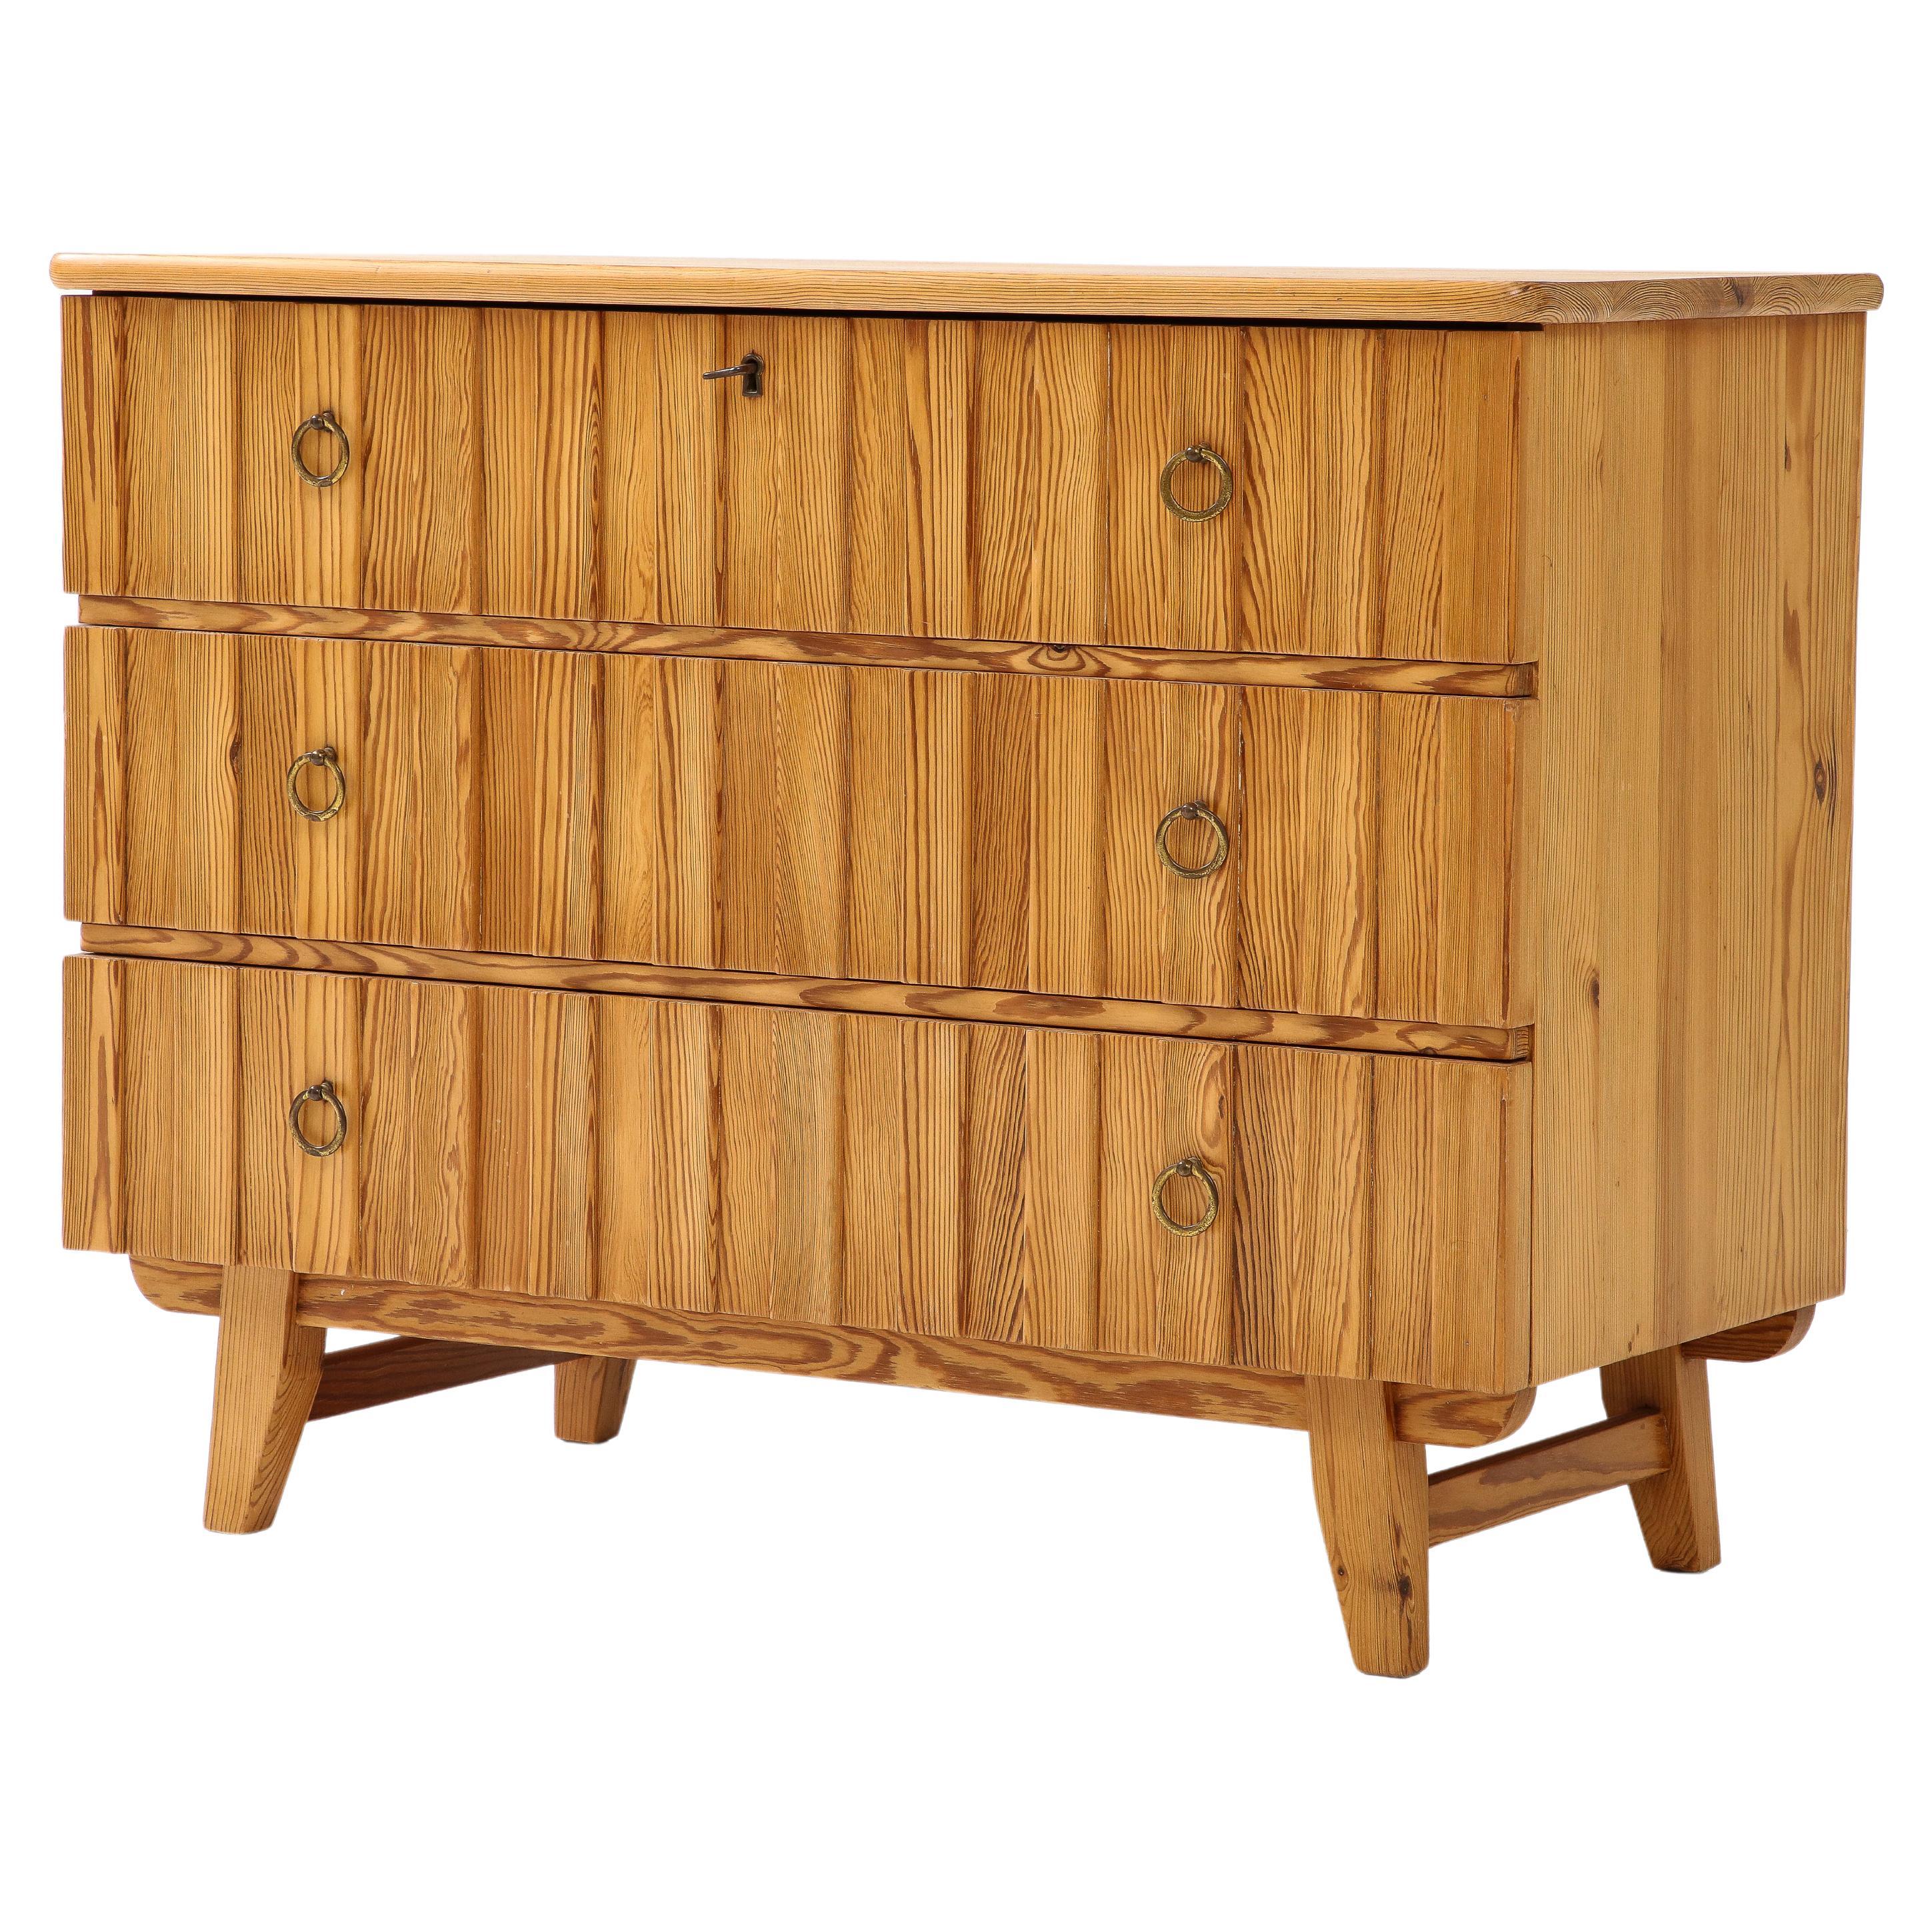 Goran Malmvall Swedish Fir Chest with Ring Handles, Sweden, 1940, signed For Sale